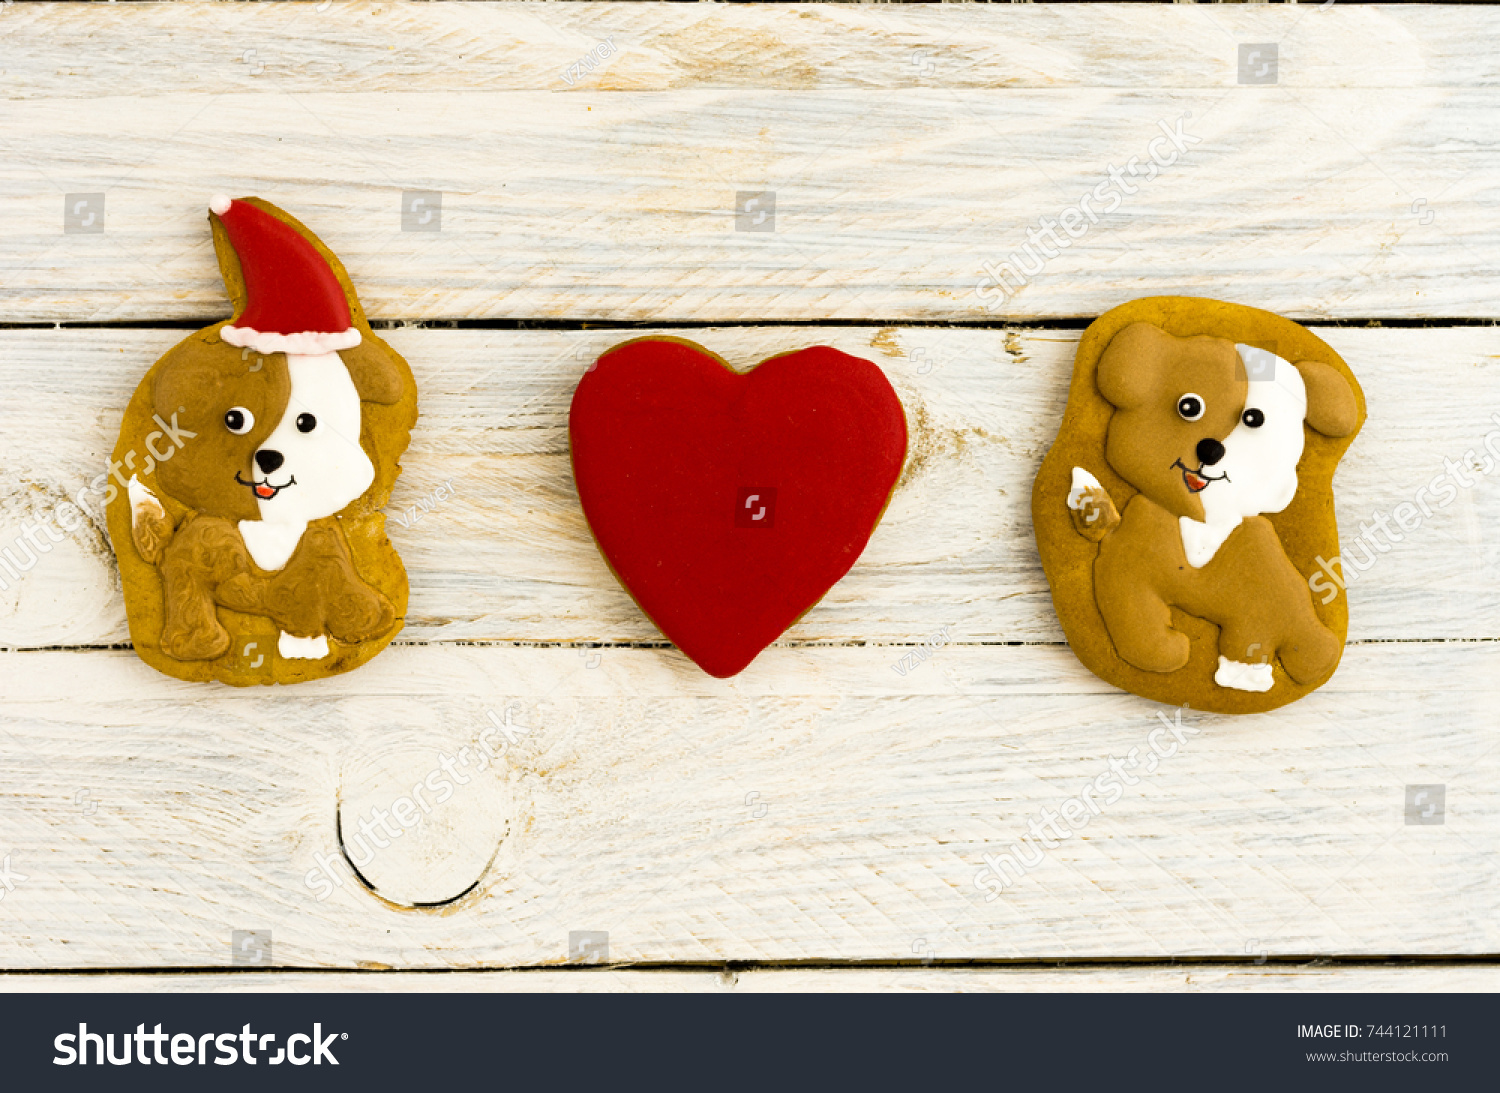 Dogs and heart. Love of dogs. Composition of gingerbread. White background. #744121111